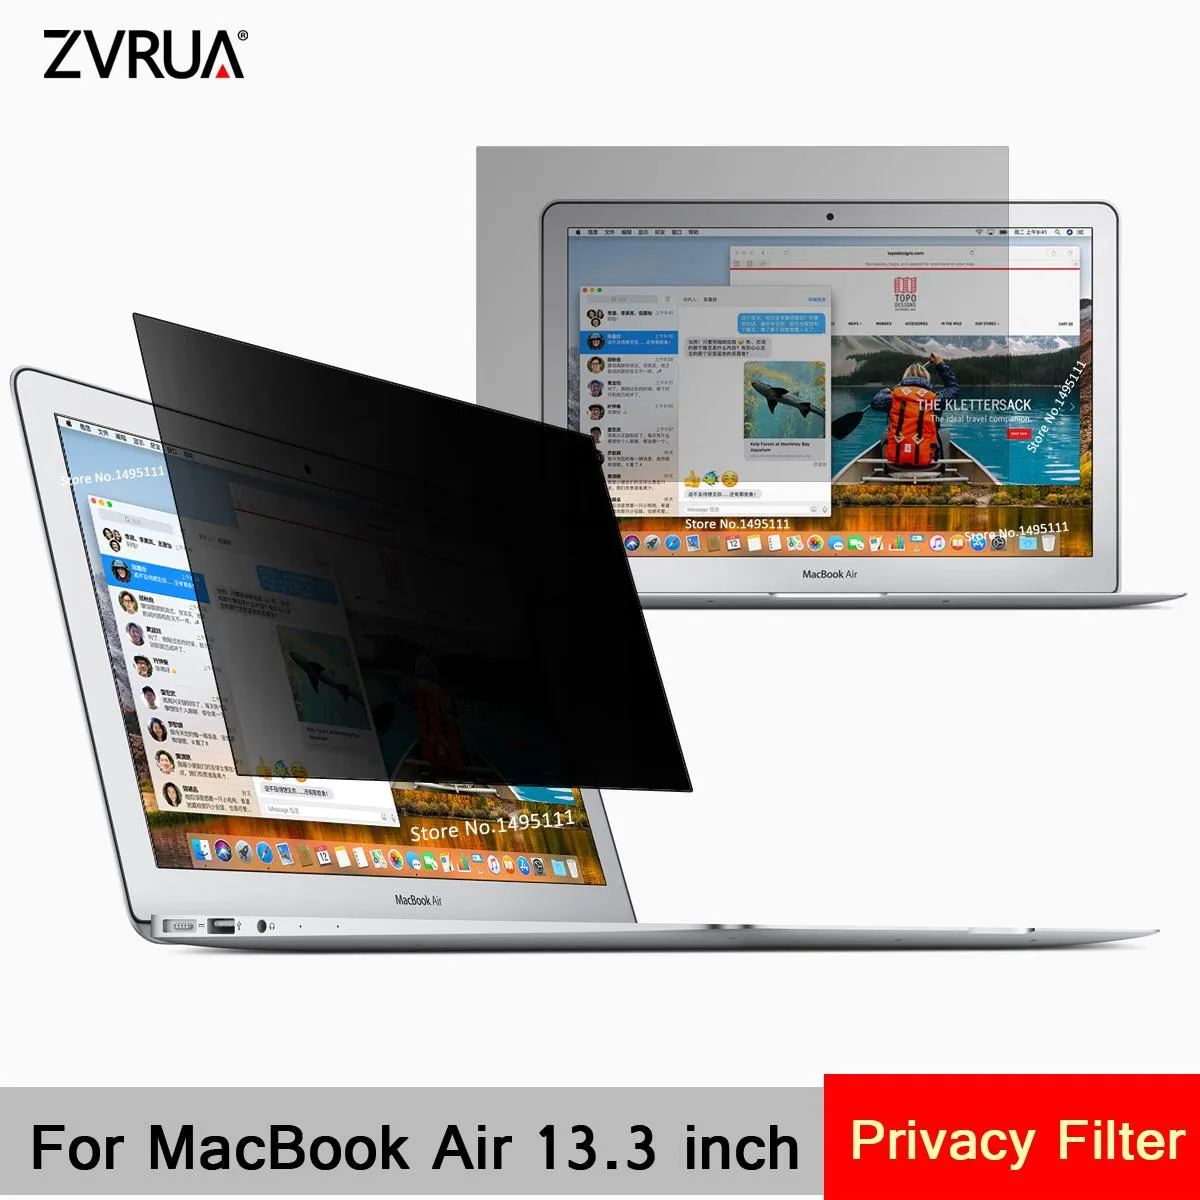 Filters For Apple MacBook Air 13.3 inch (286mm*179mm) Privacy Filter Laptop Notebook Antiglare Screen protector Protective film